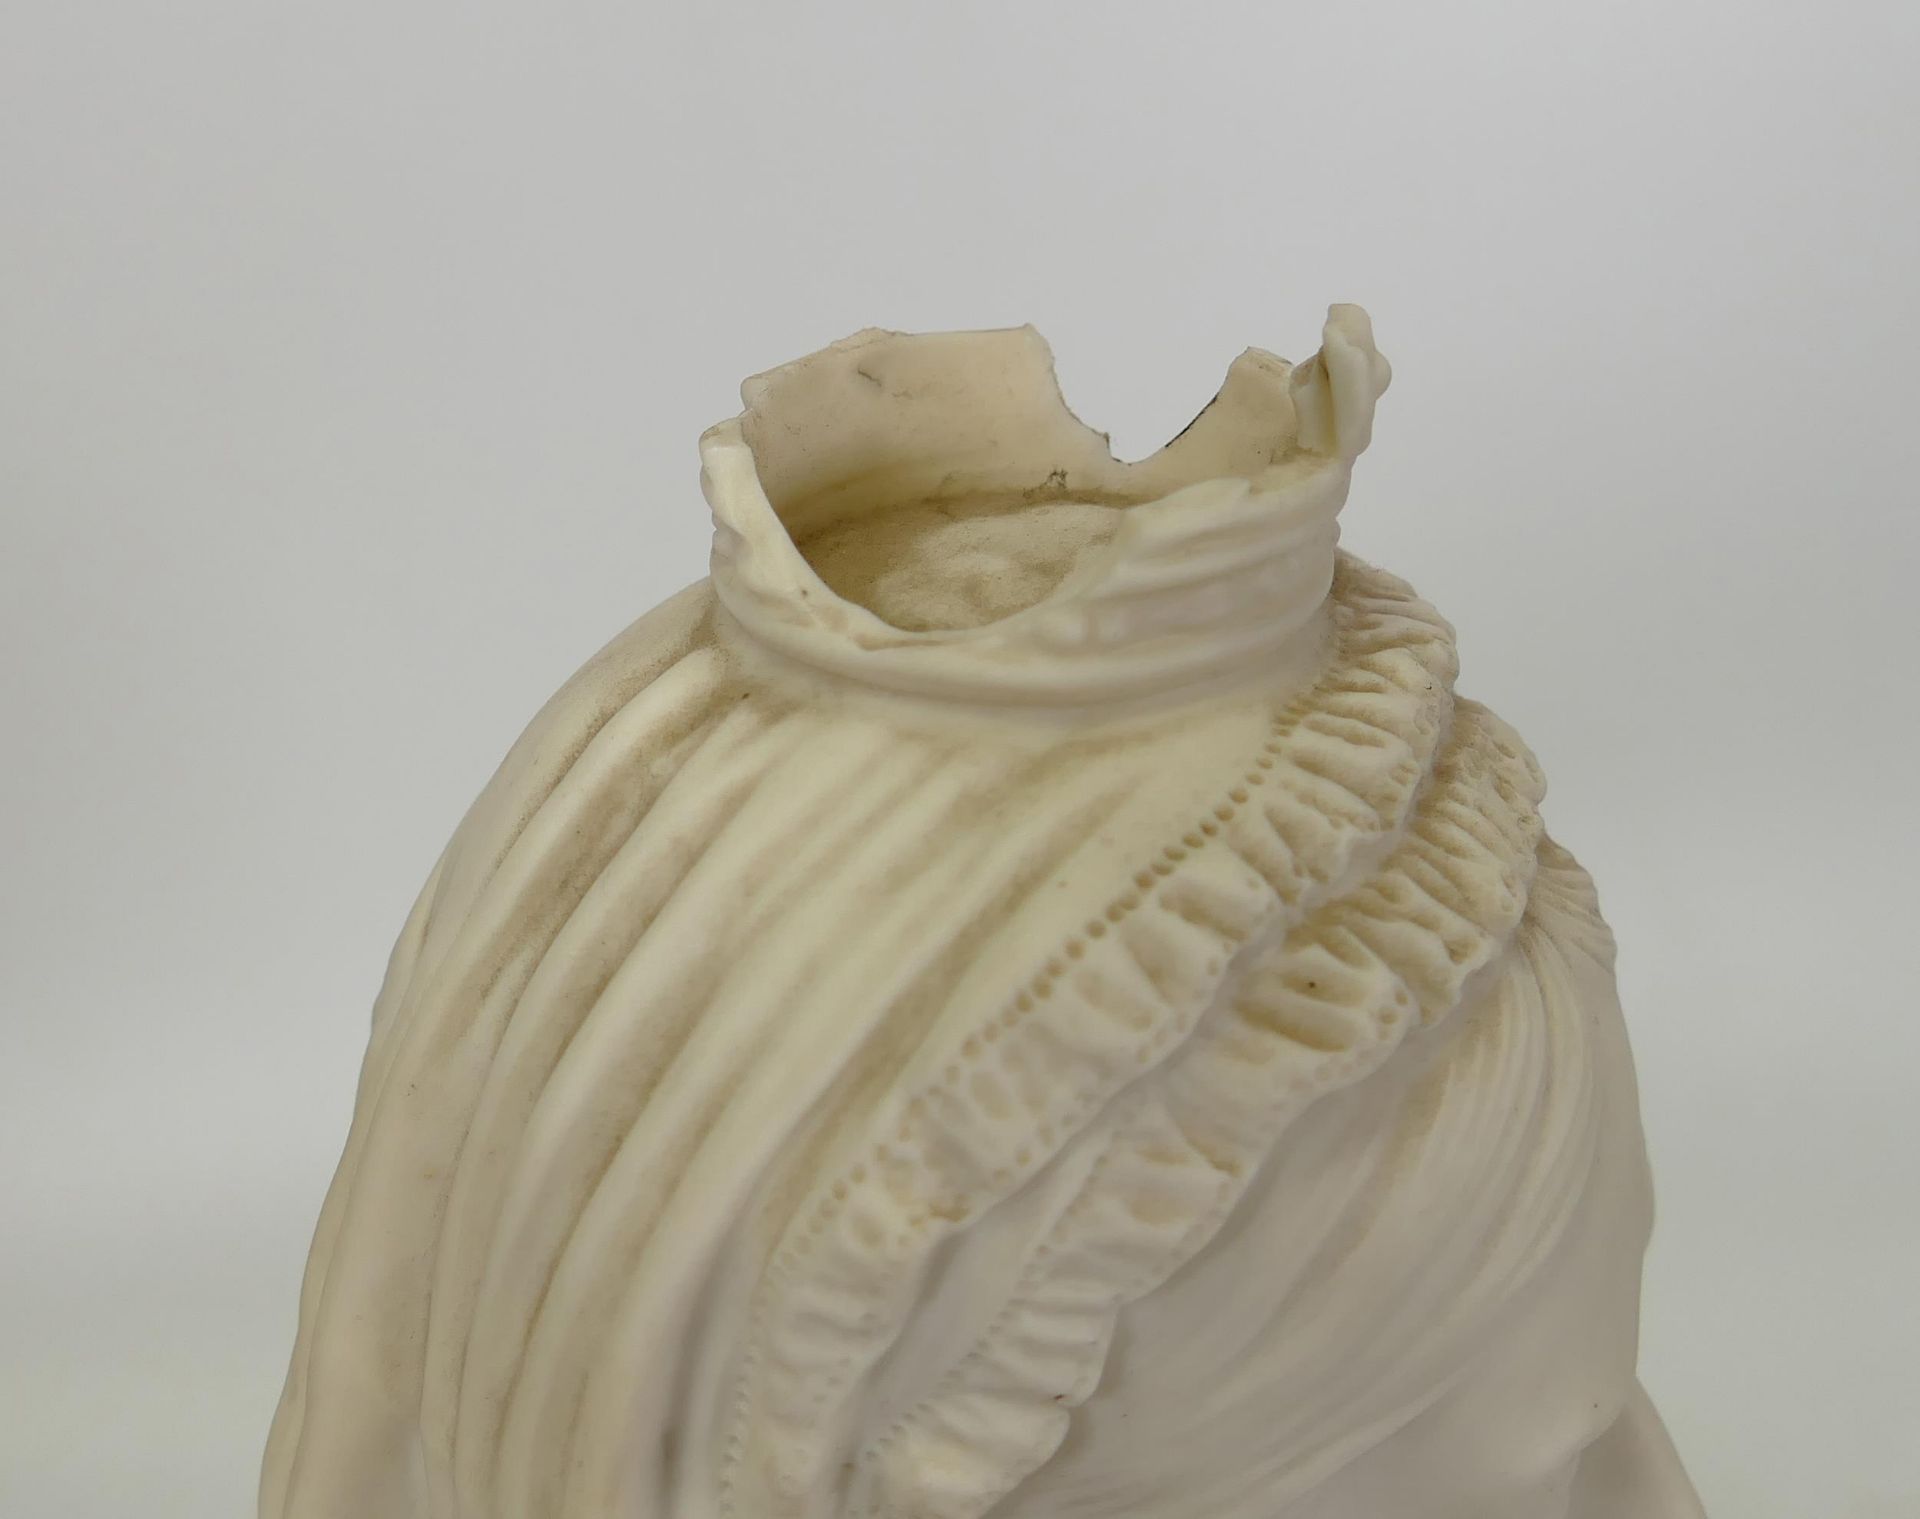 Turner & Wood Parian Bust of Queen Victoria, damaged crown, height 24cm - Image 2 of 4